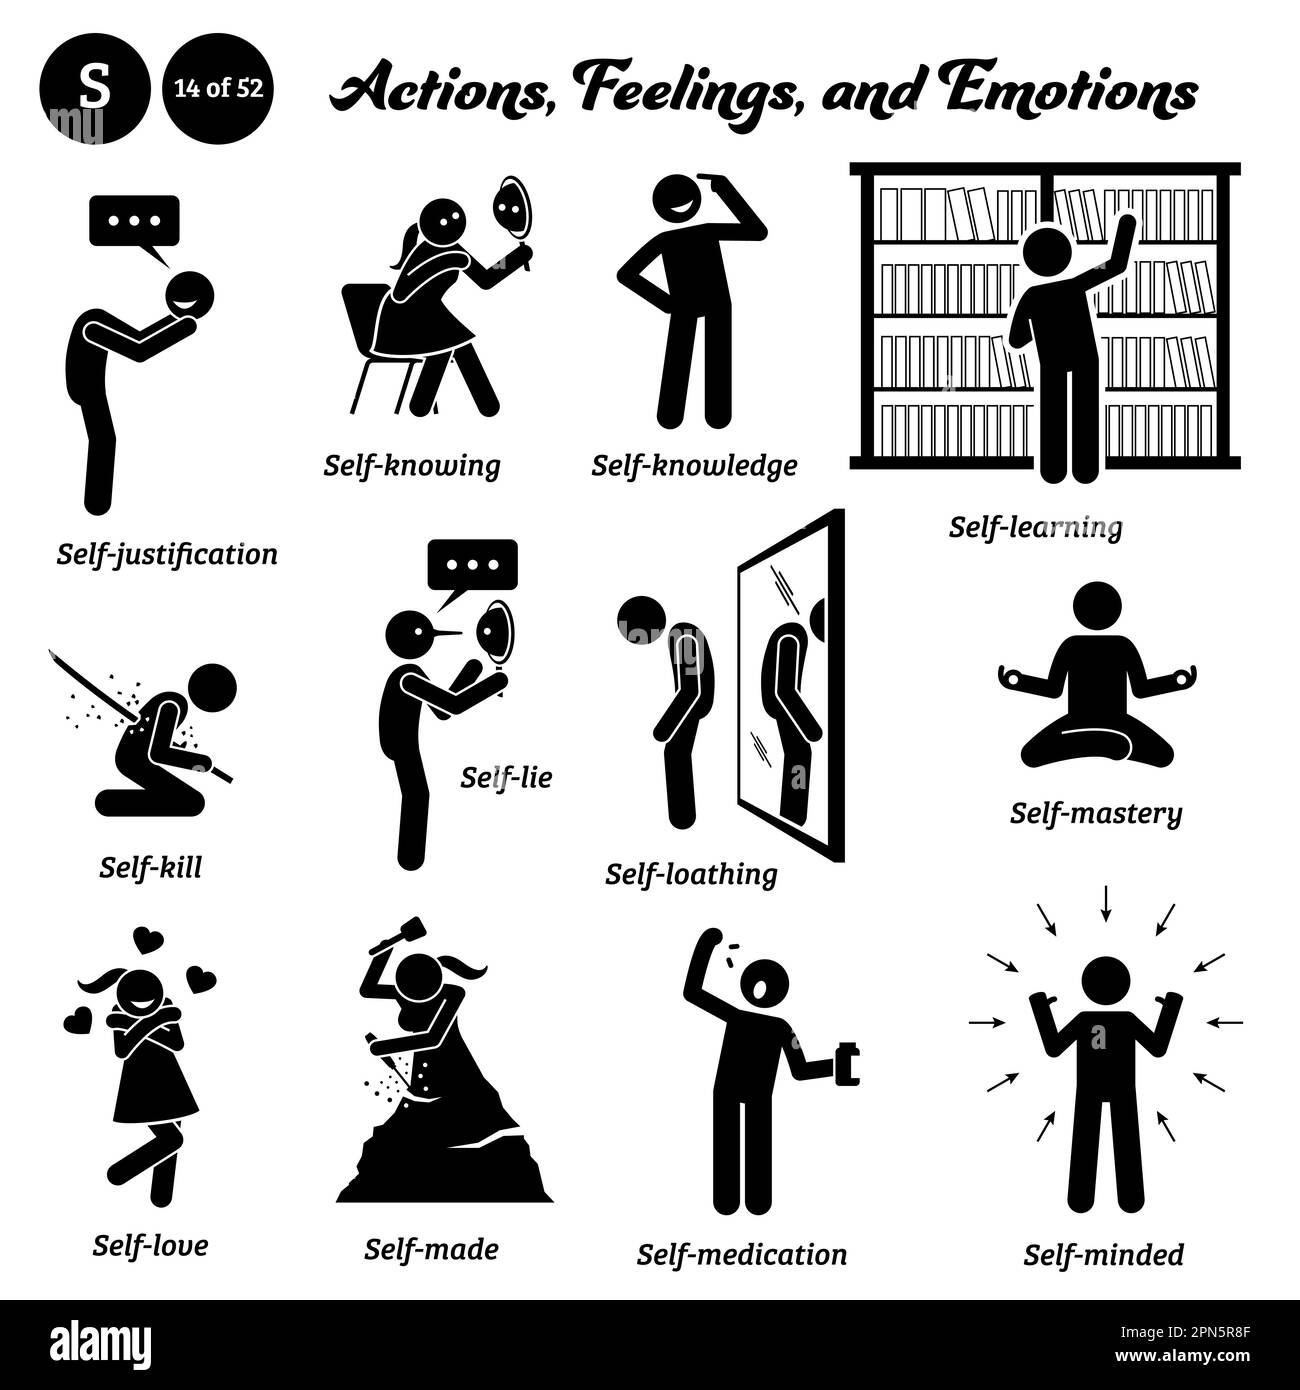 Stick figure human people man action, feelings, and emotions icons alphabet S. Self, justification, knowing, knowledge, learning, kill, lie, loathing, Stock Vector